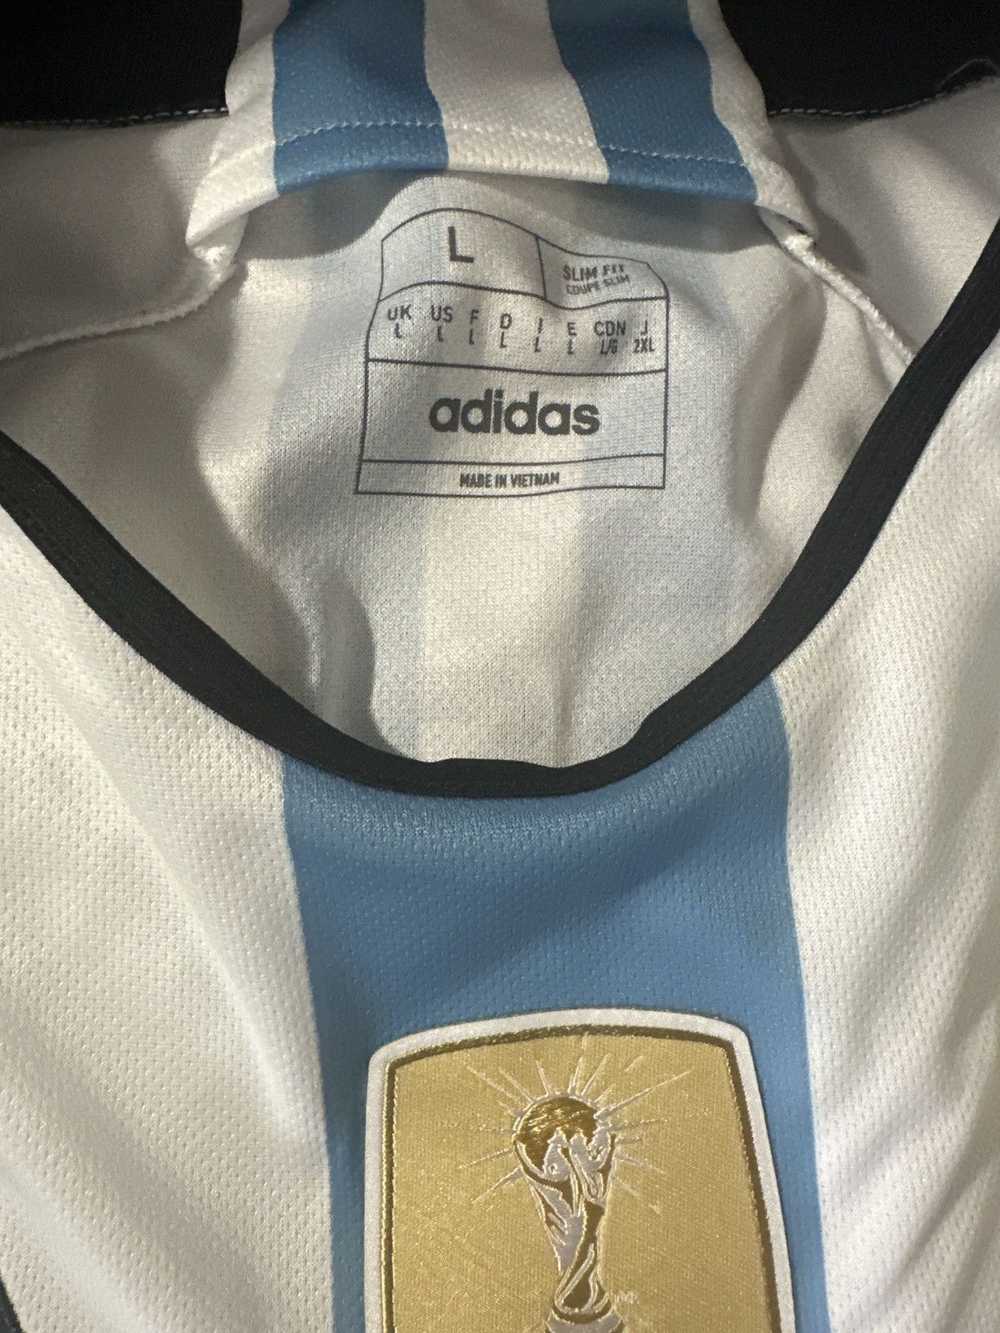 Adidas Argentina Messi 3x World Cup Jersey - image 2